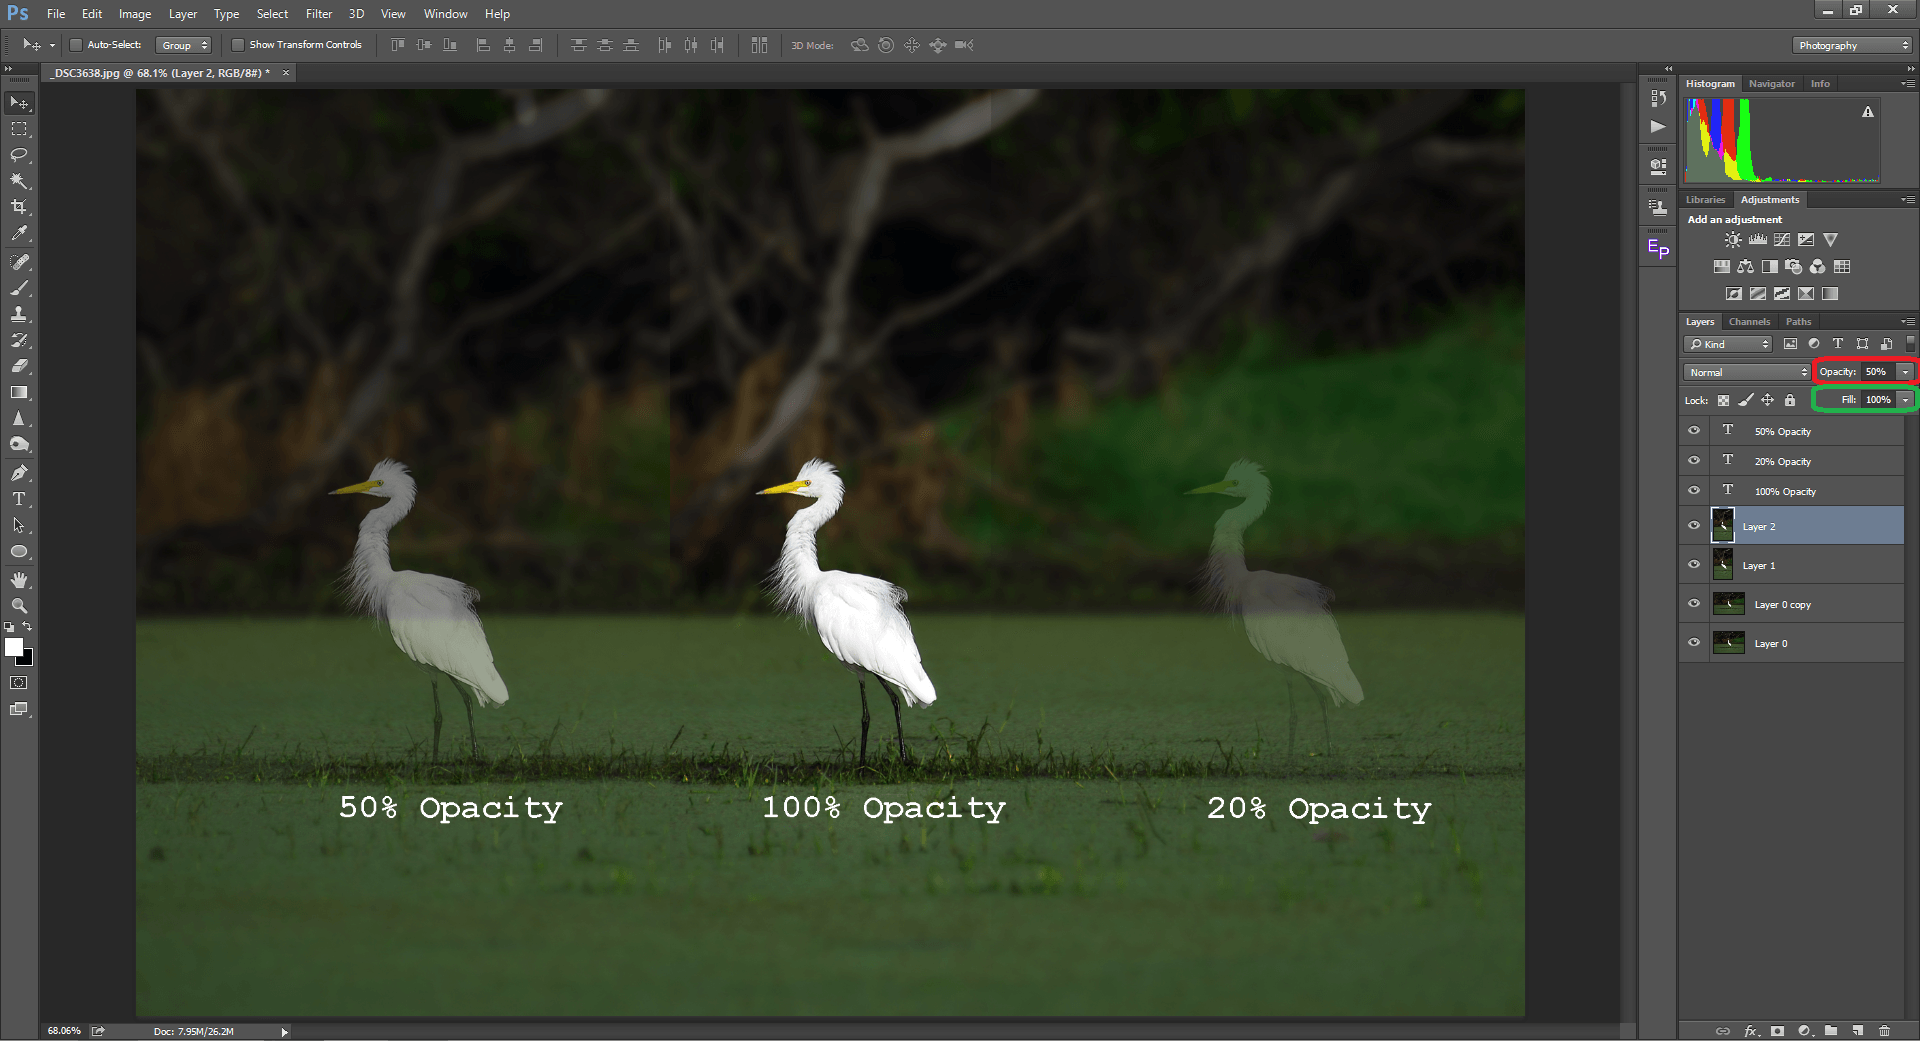 segment vinge Broom How to Blend Layers in Photoshop: Blend Modes Explained